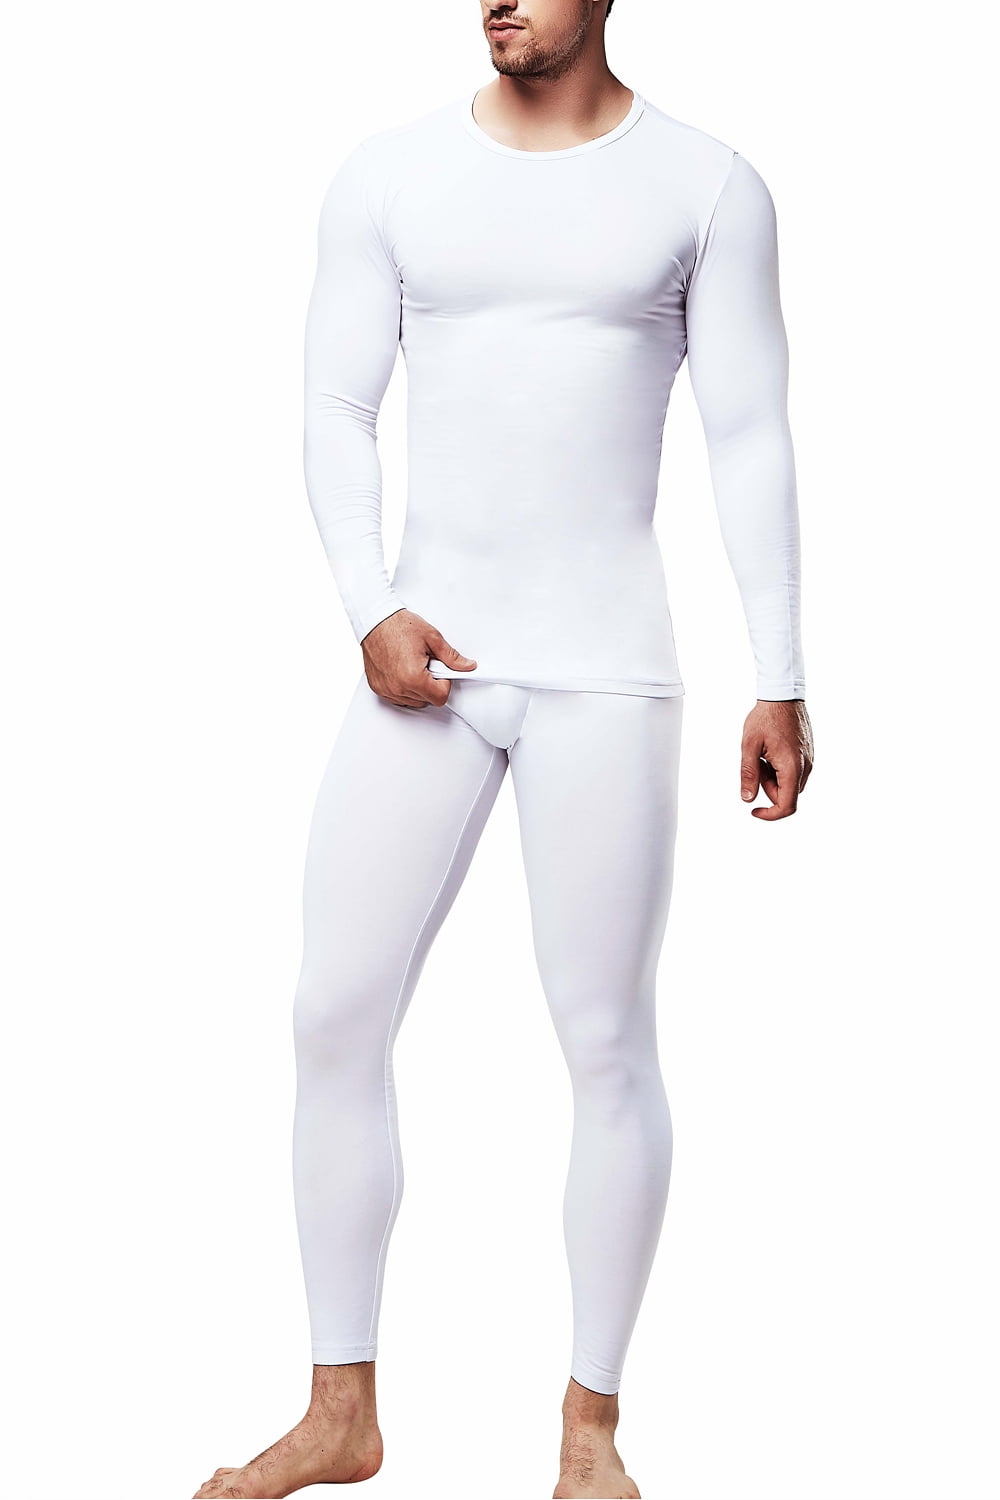 Men's Long johns fleece line base layer set for cold weather (Small ...